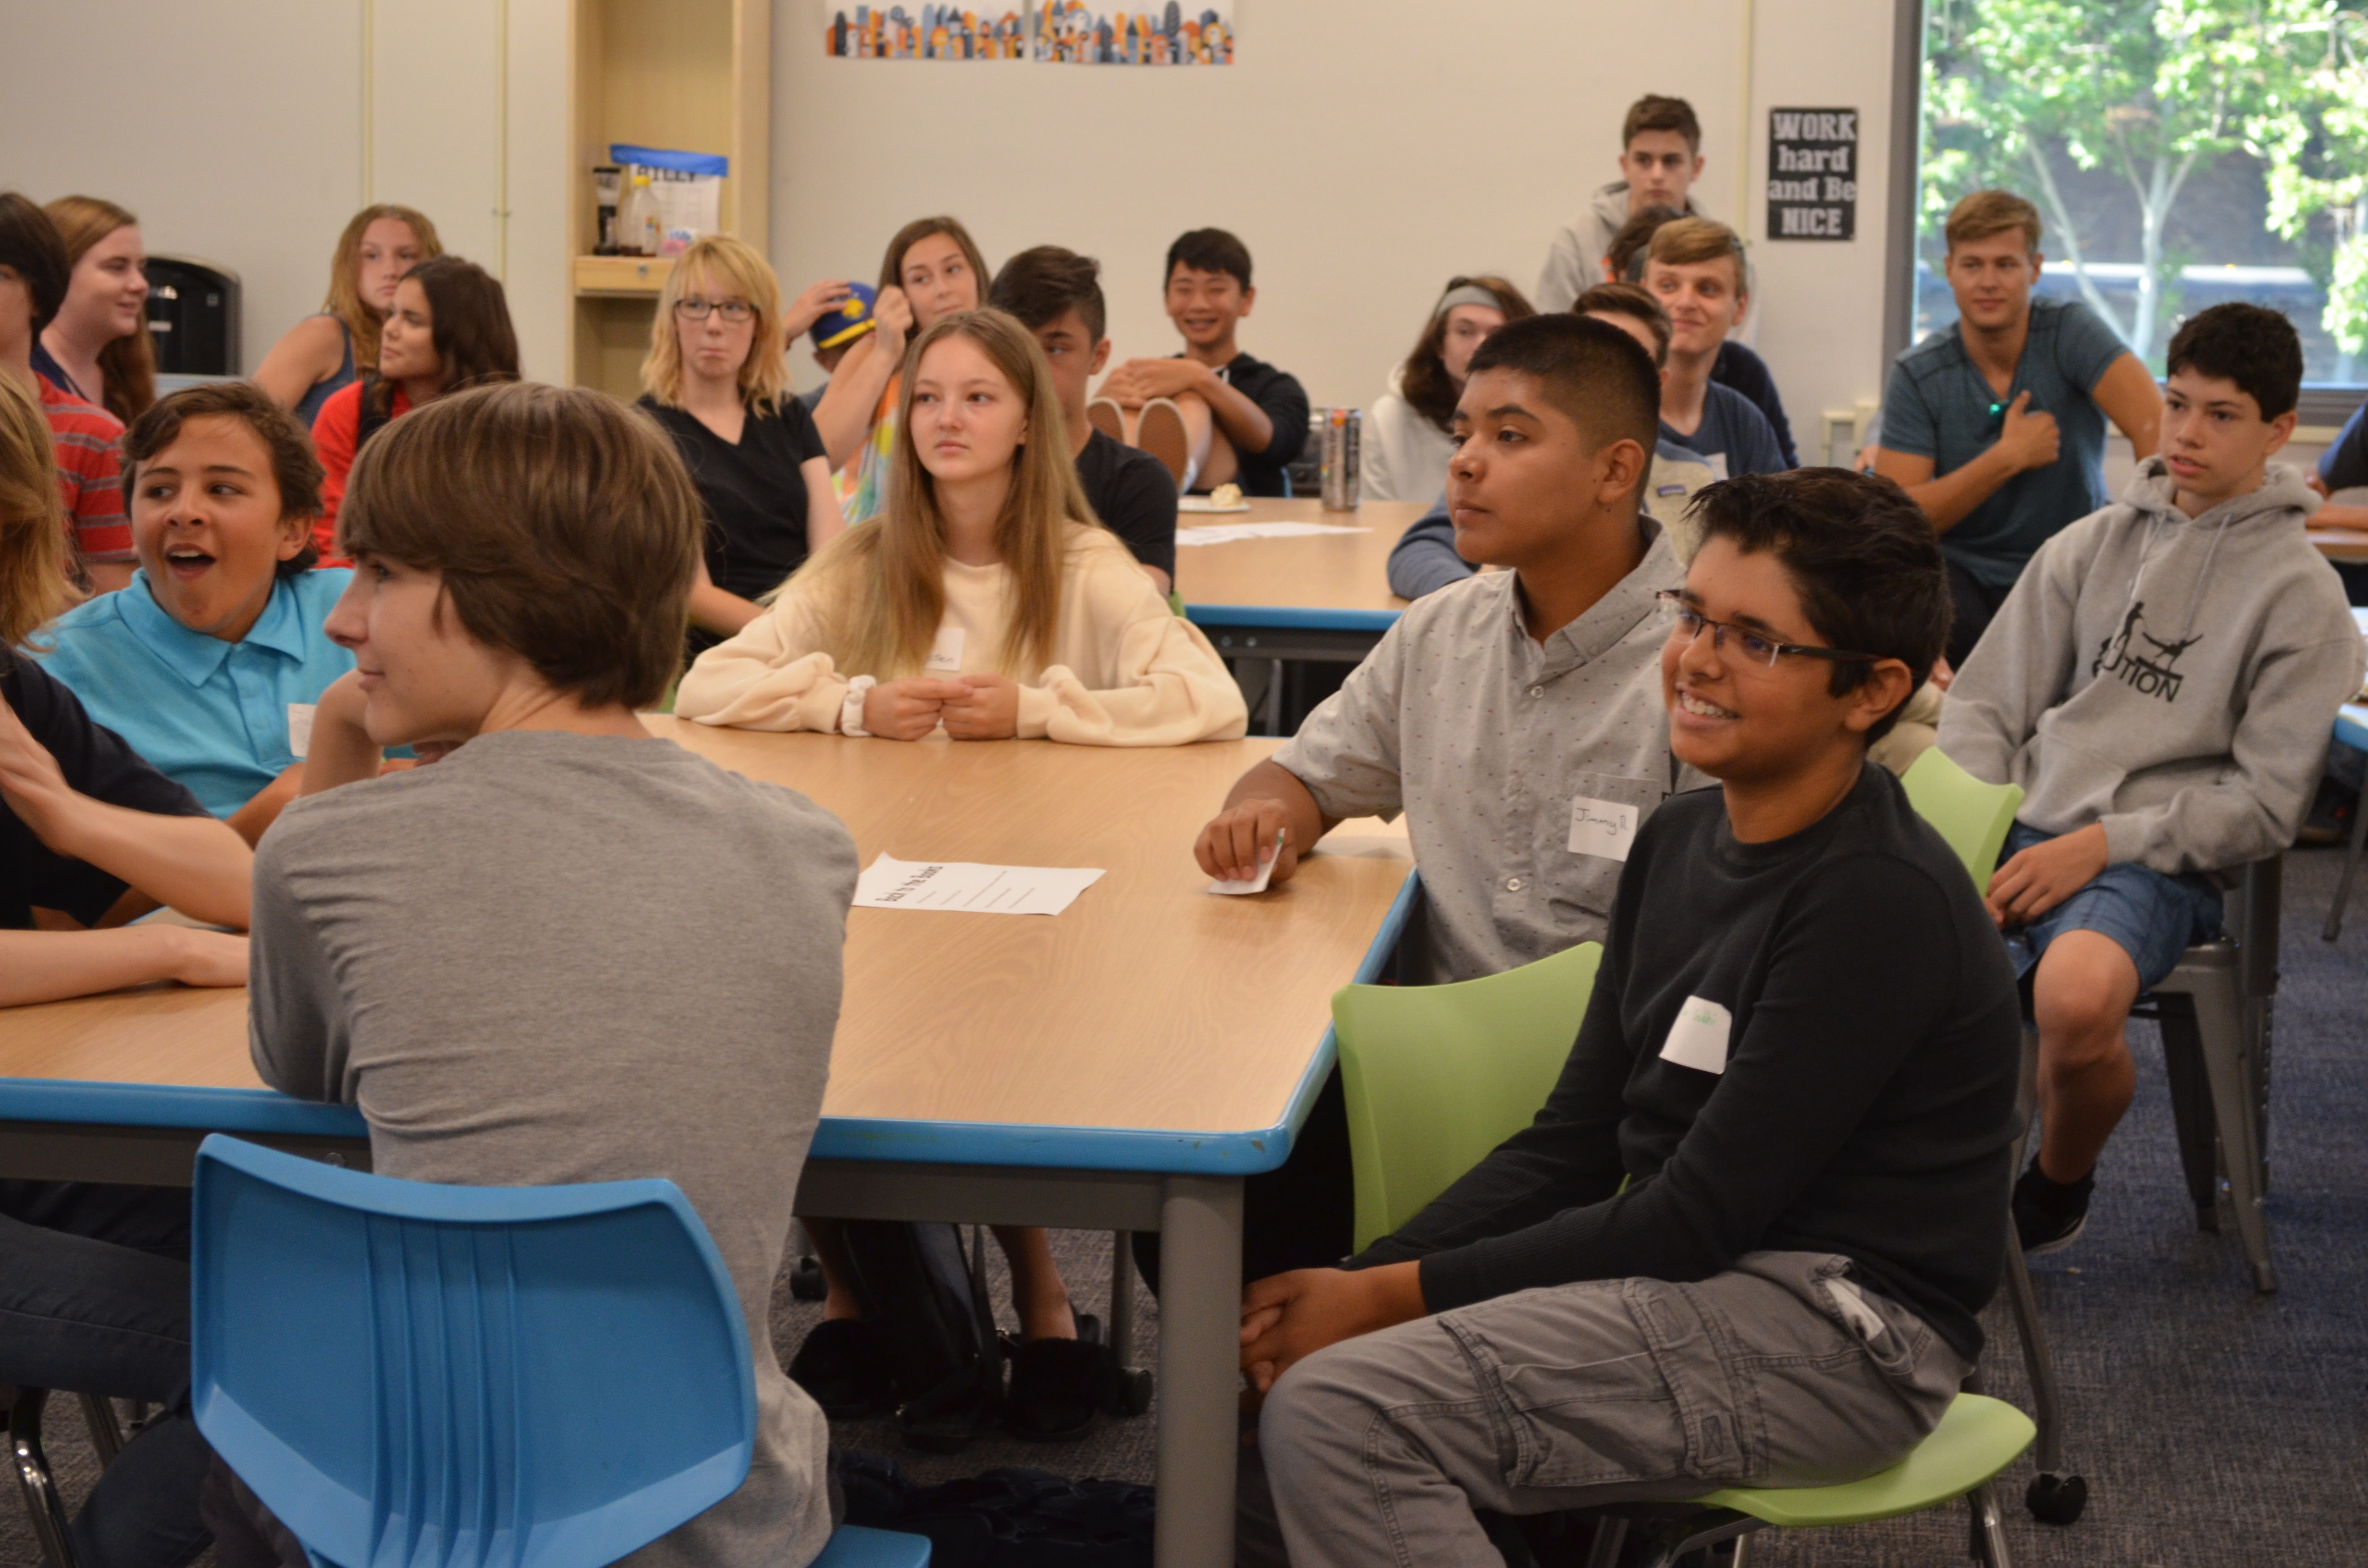 Students sit around tables and listen during Orientation Day at Quest Forward Academy Santa Rosa.